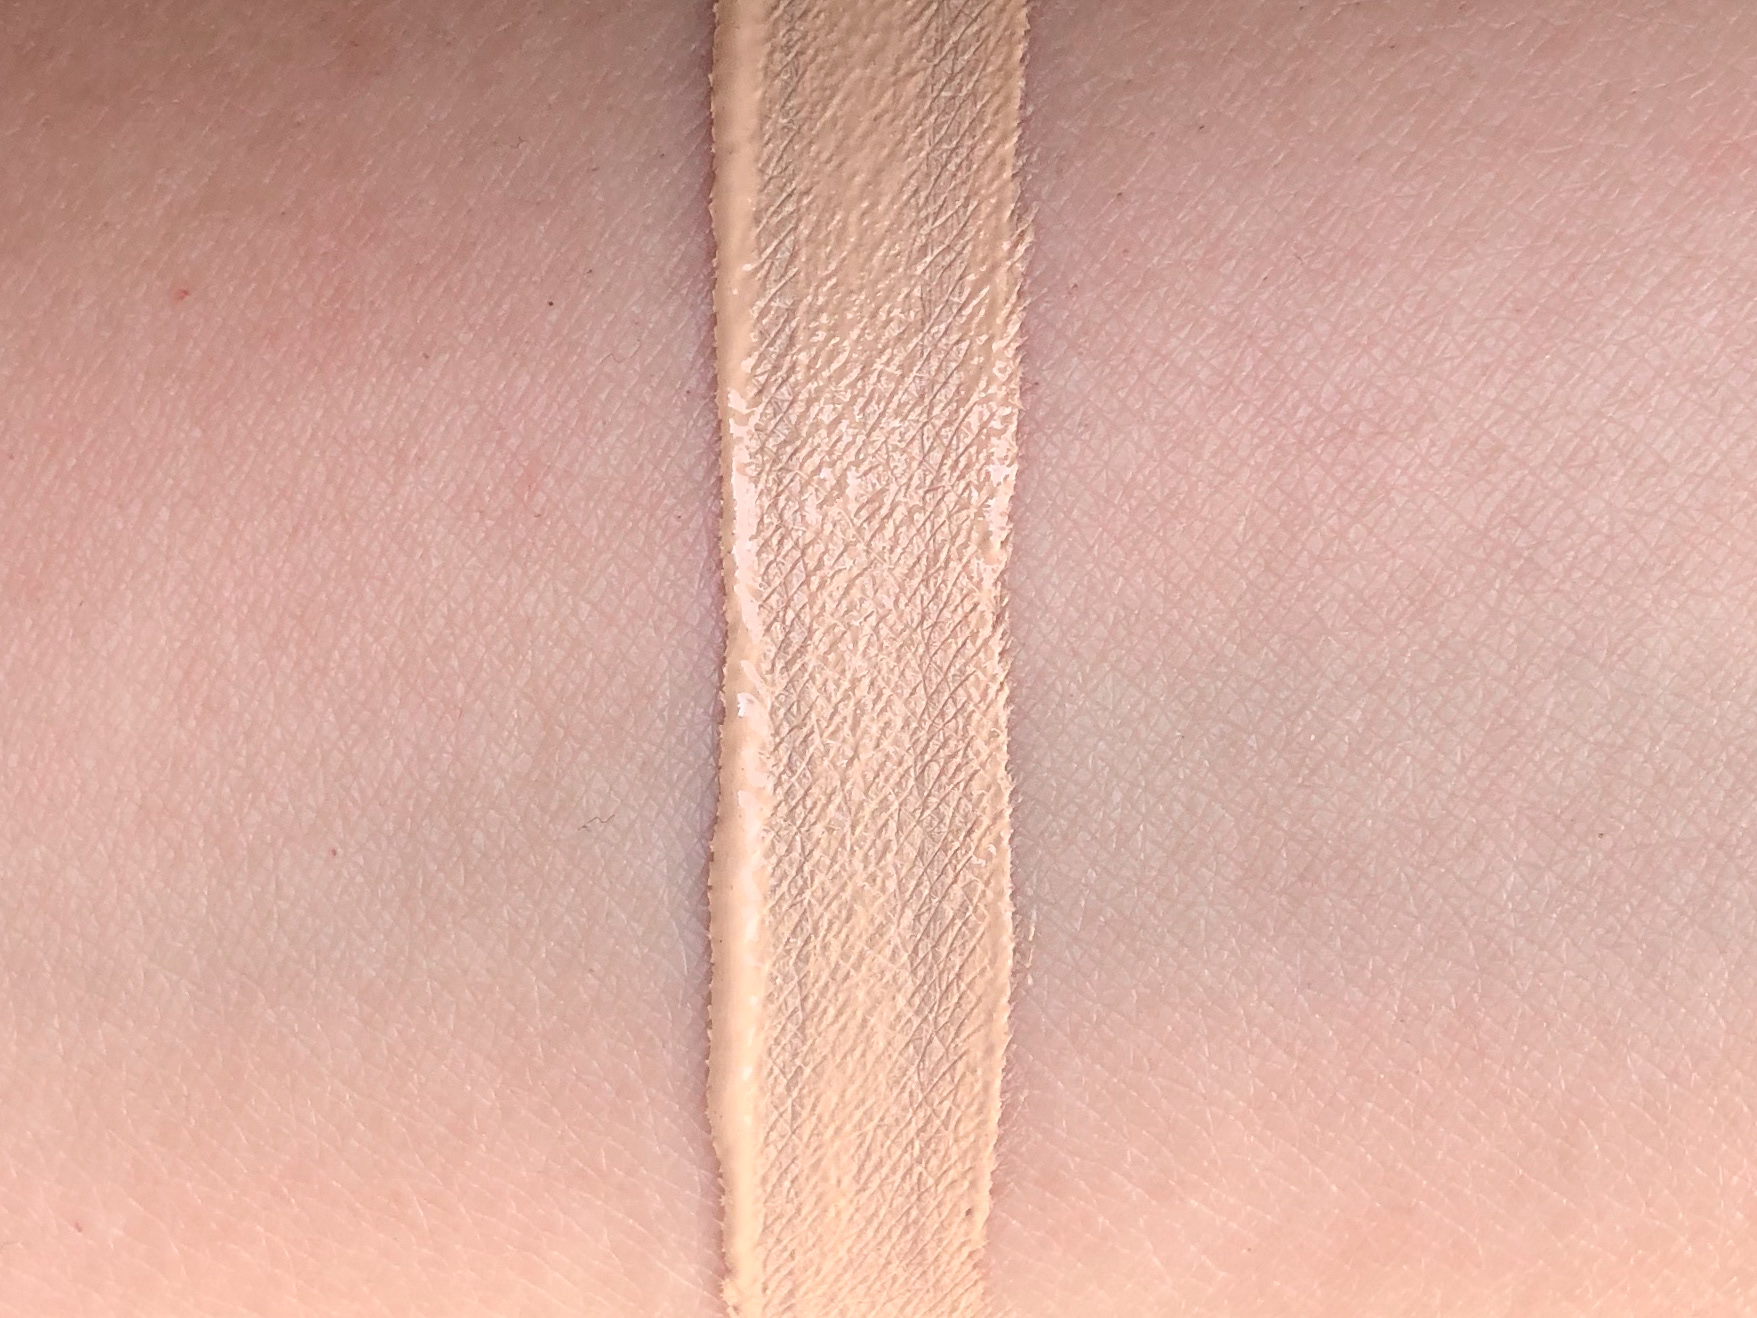 L'Oreal Infallible More Than Concealer review shades swatch